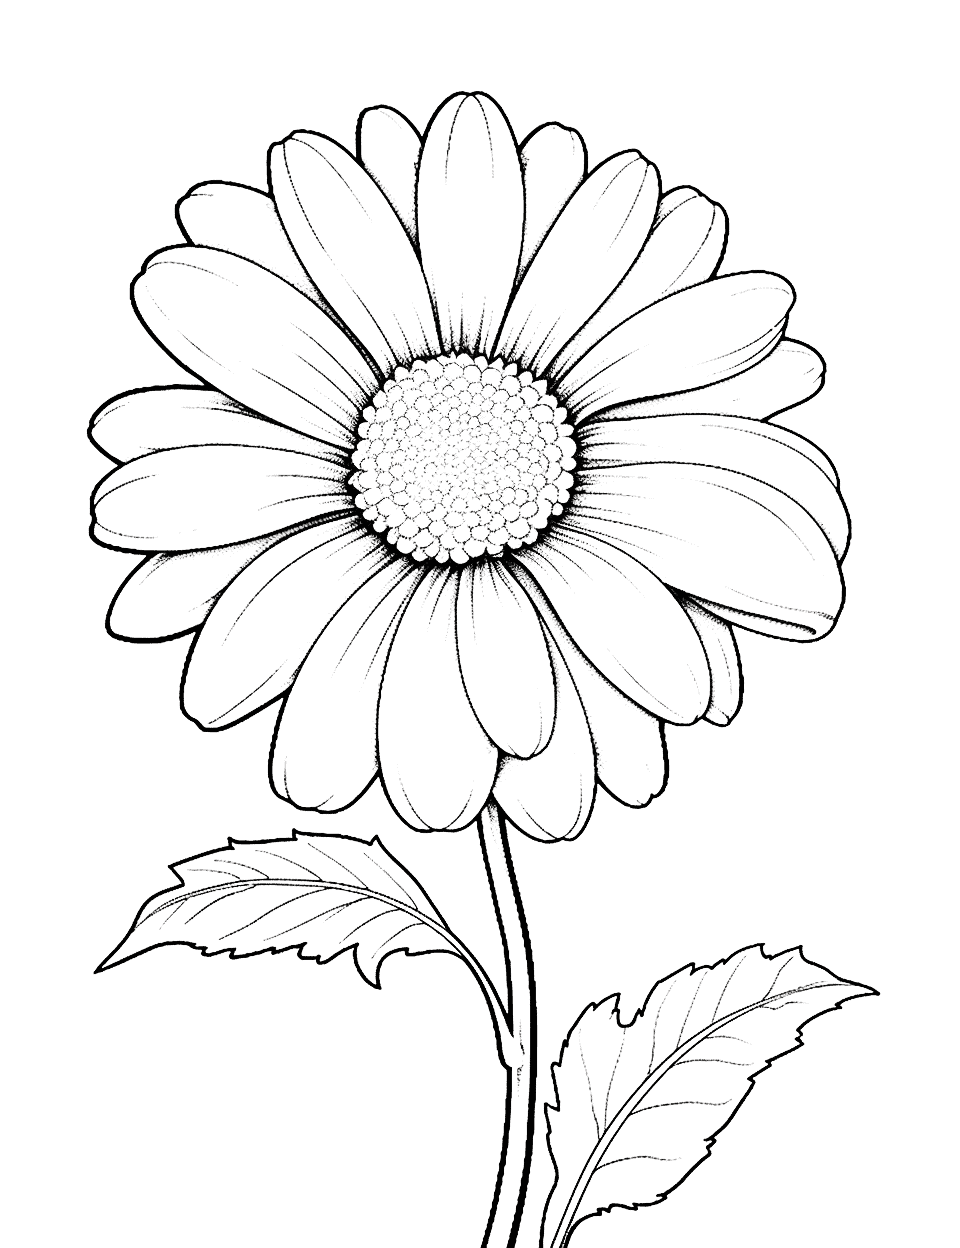 Difficult Daisy Drawing Flower Coloring Page - An intricate, detailed drawing of a daisy for a challenging coloring session.